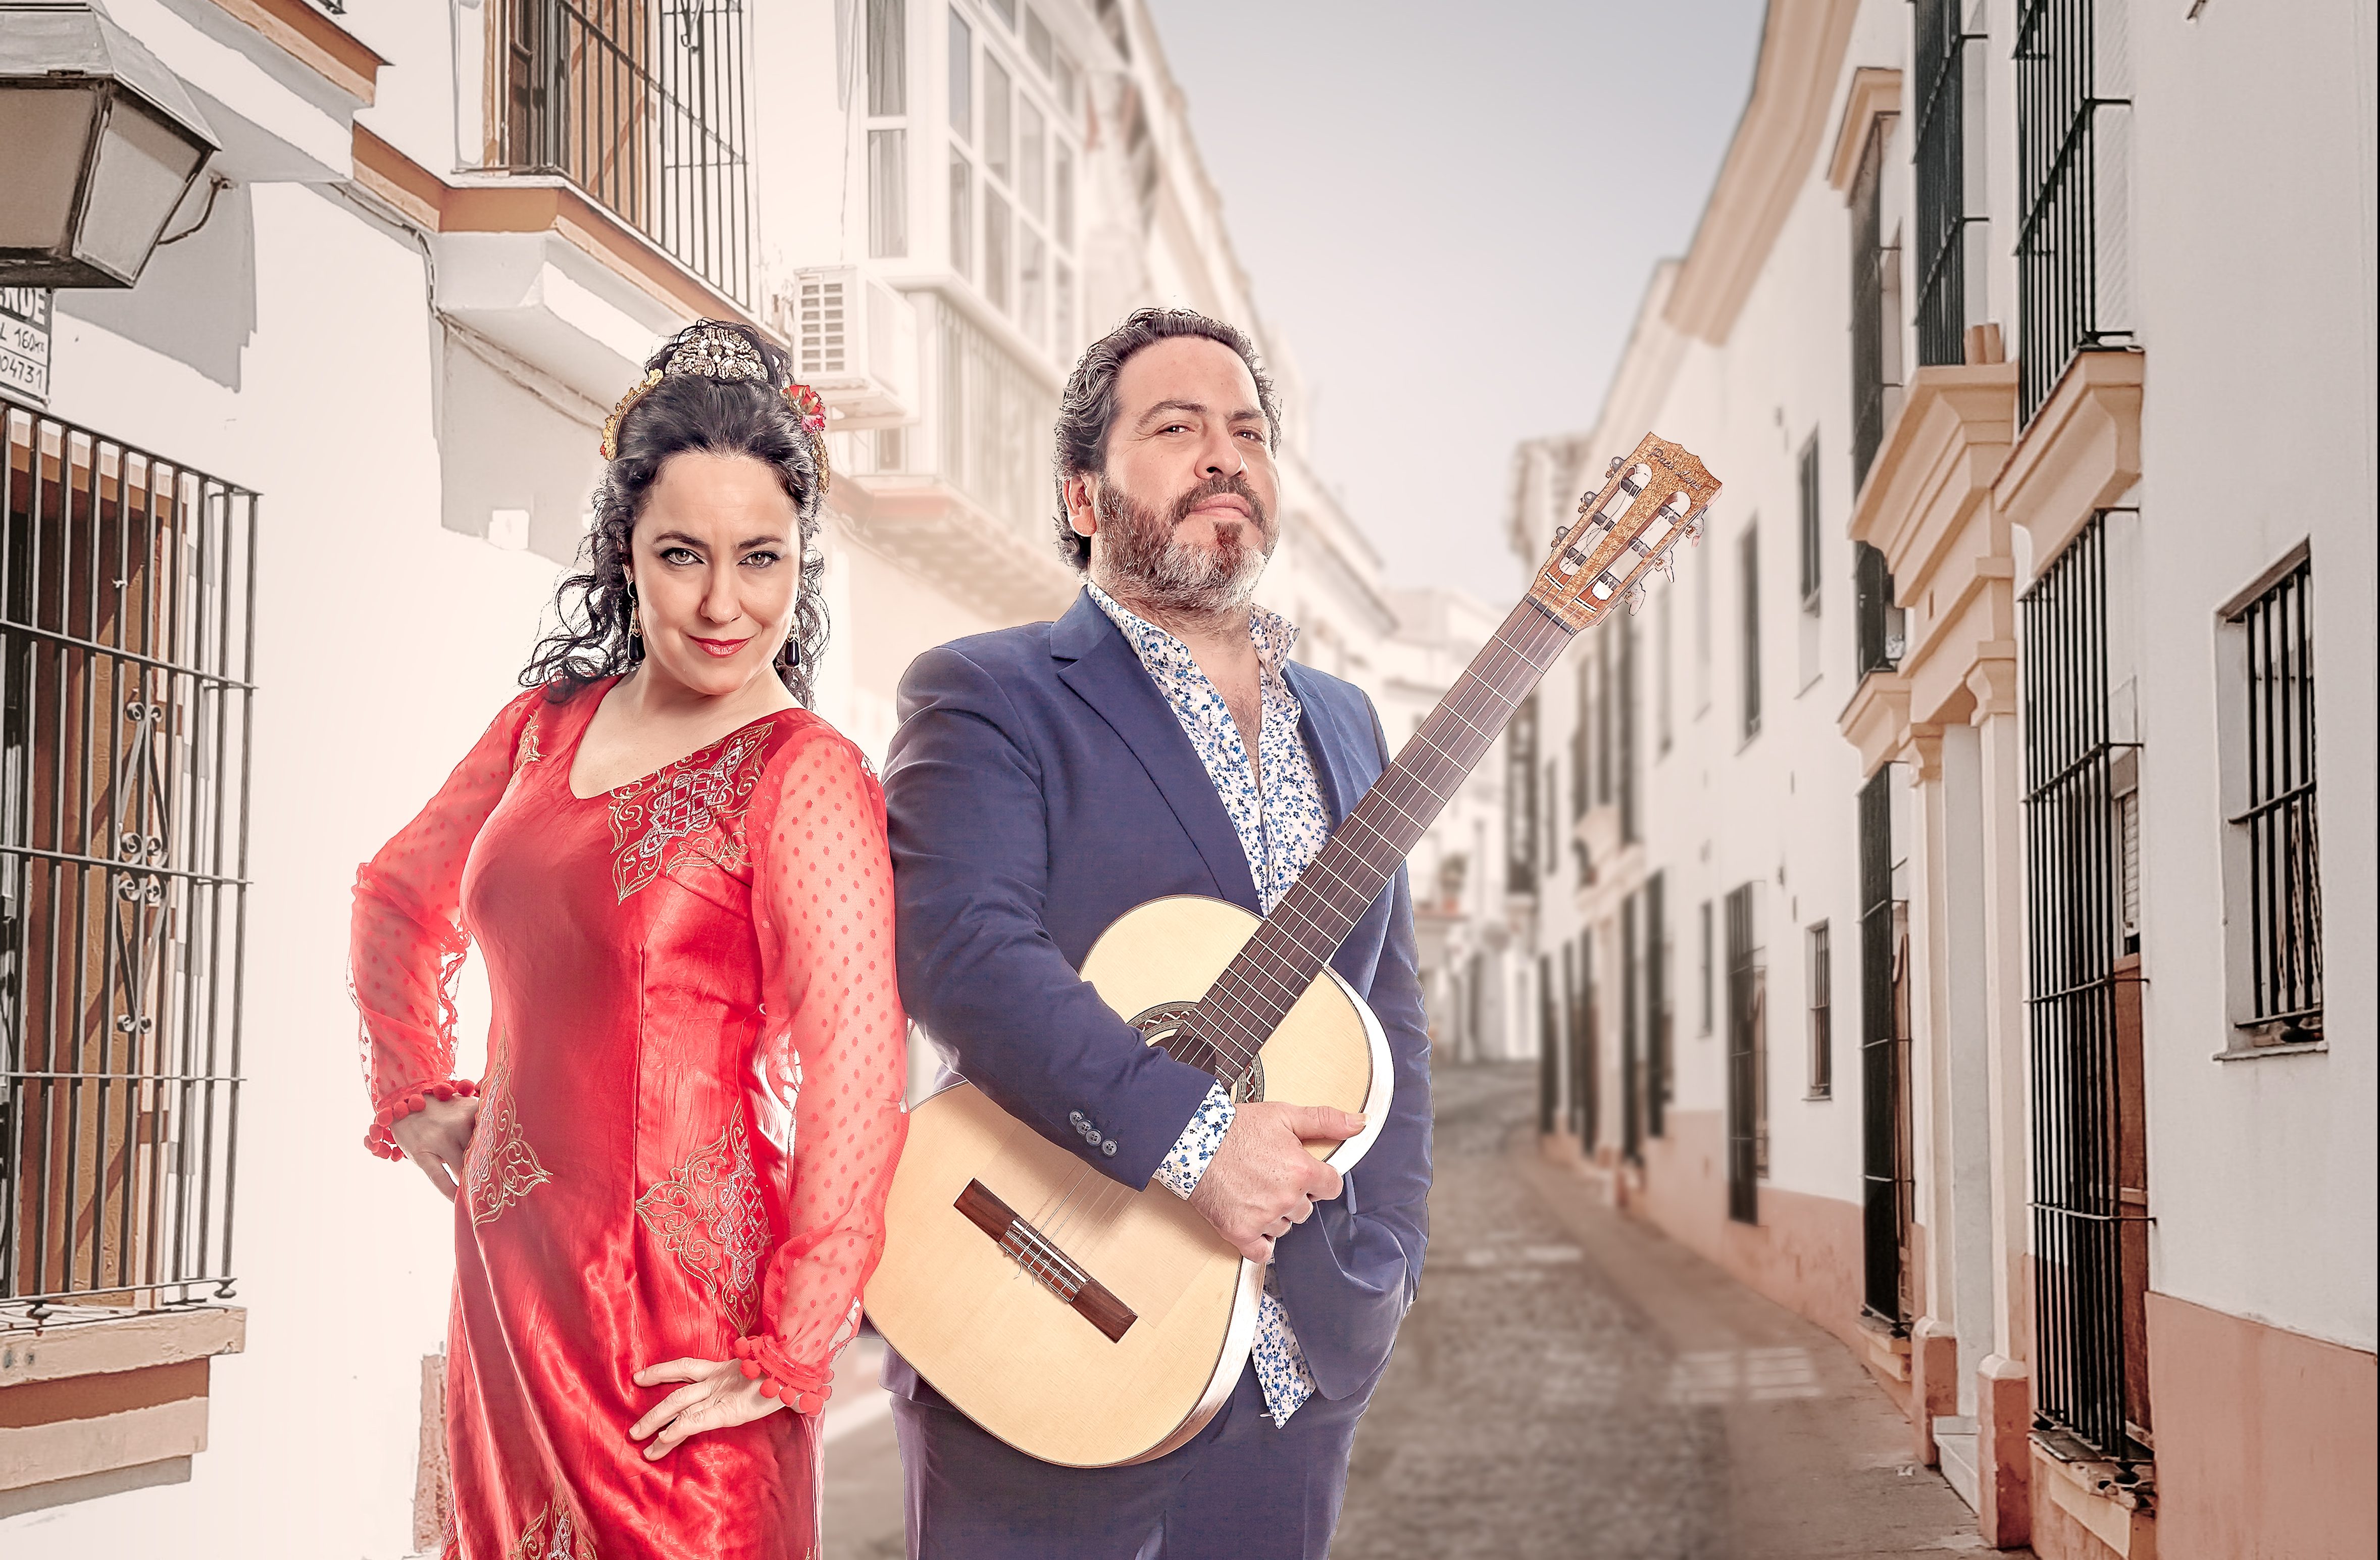 Paco and Deya Lara stand next to each other in a bright alleyway. Paco holds his guitar and Deya wears a red flamenco dress